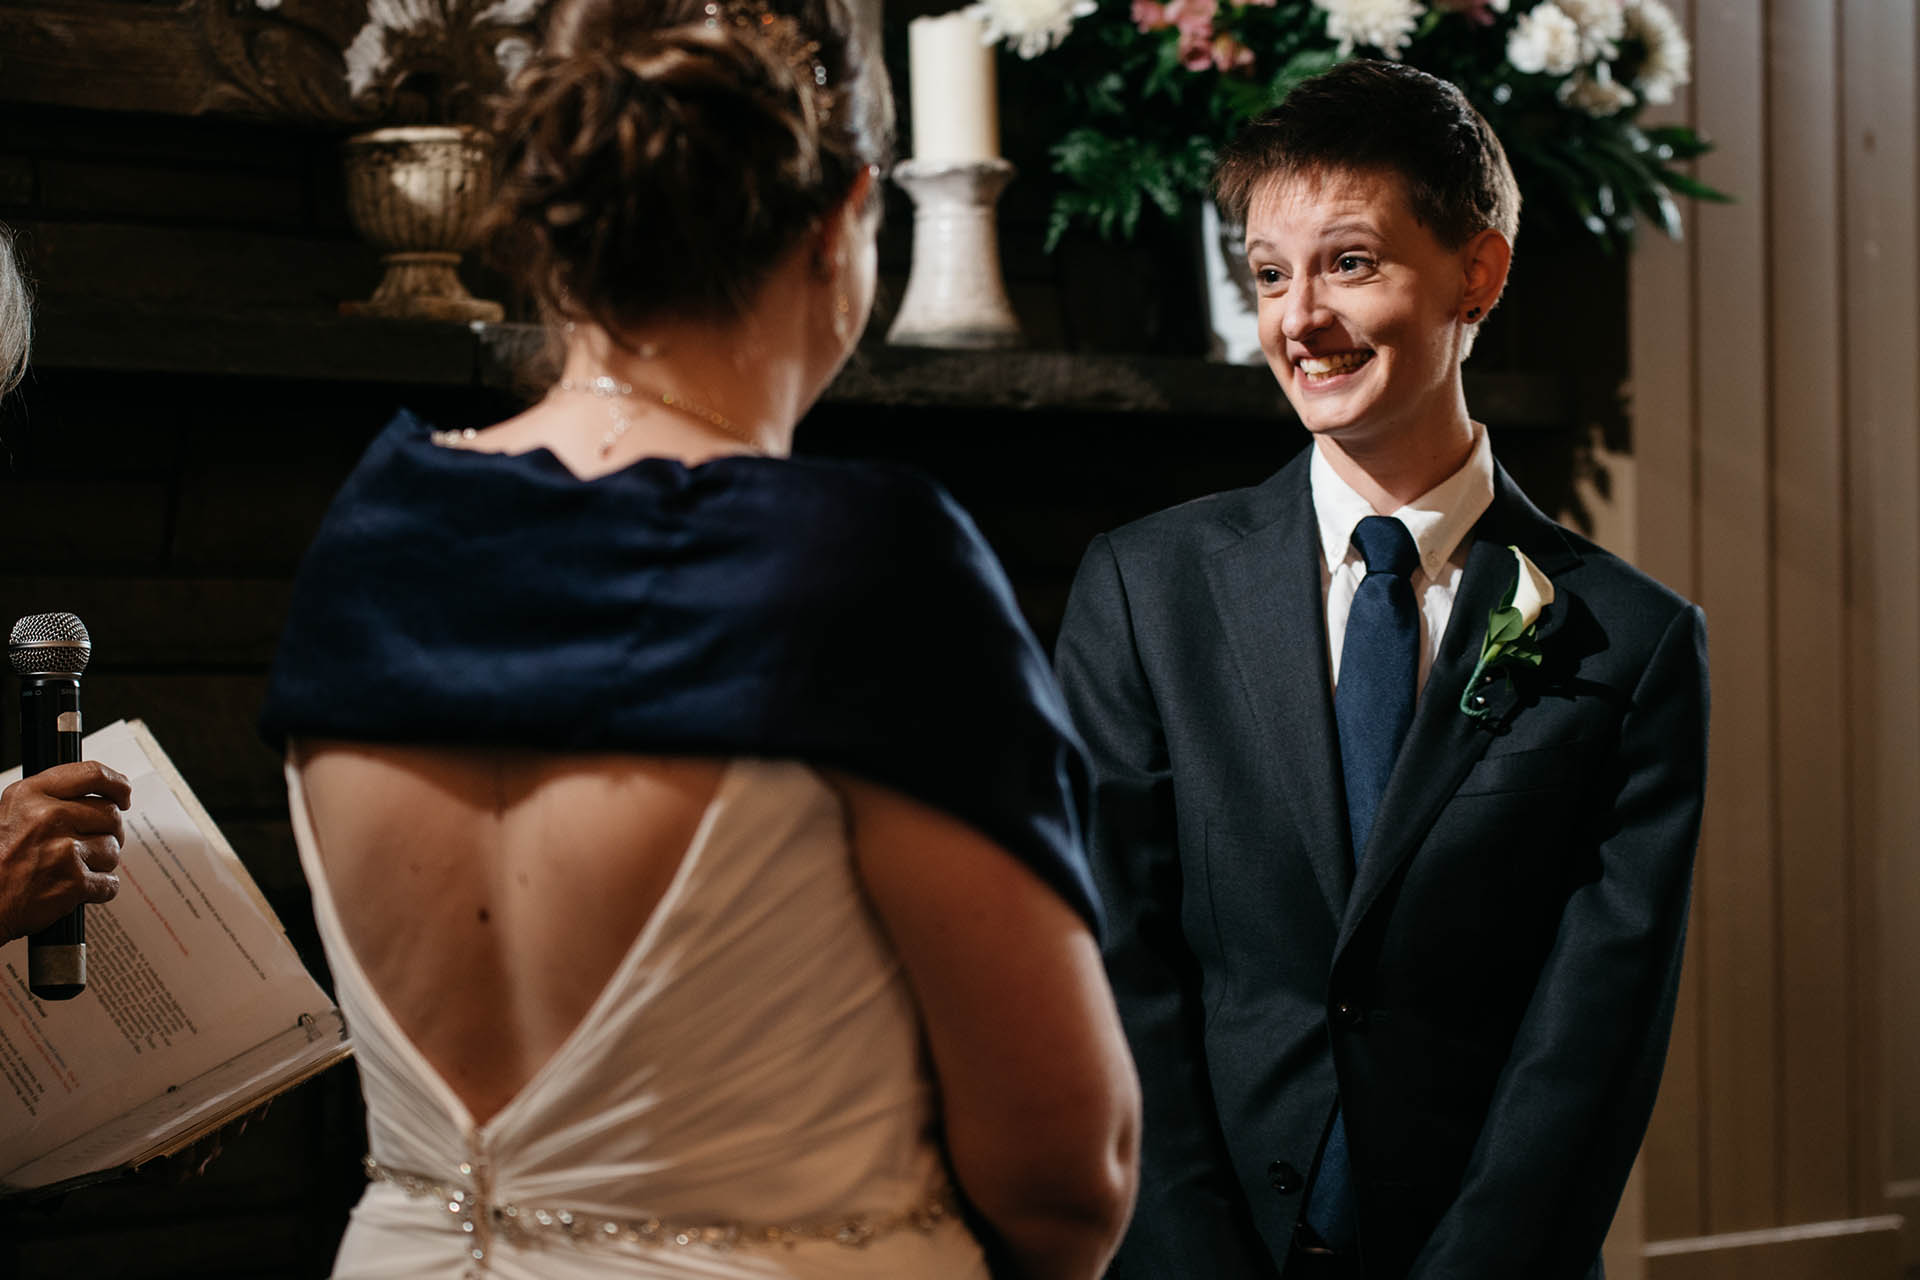 LGBT wedding couple smiling at one another.